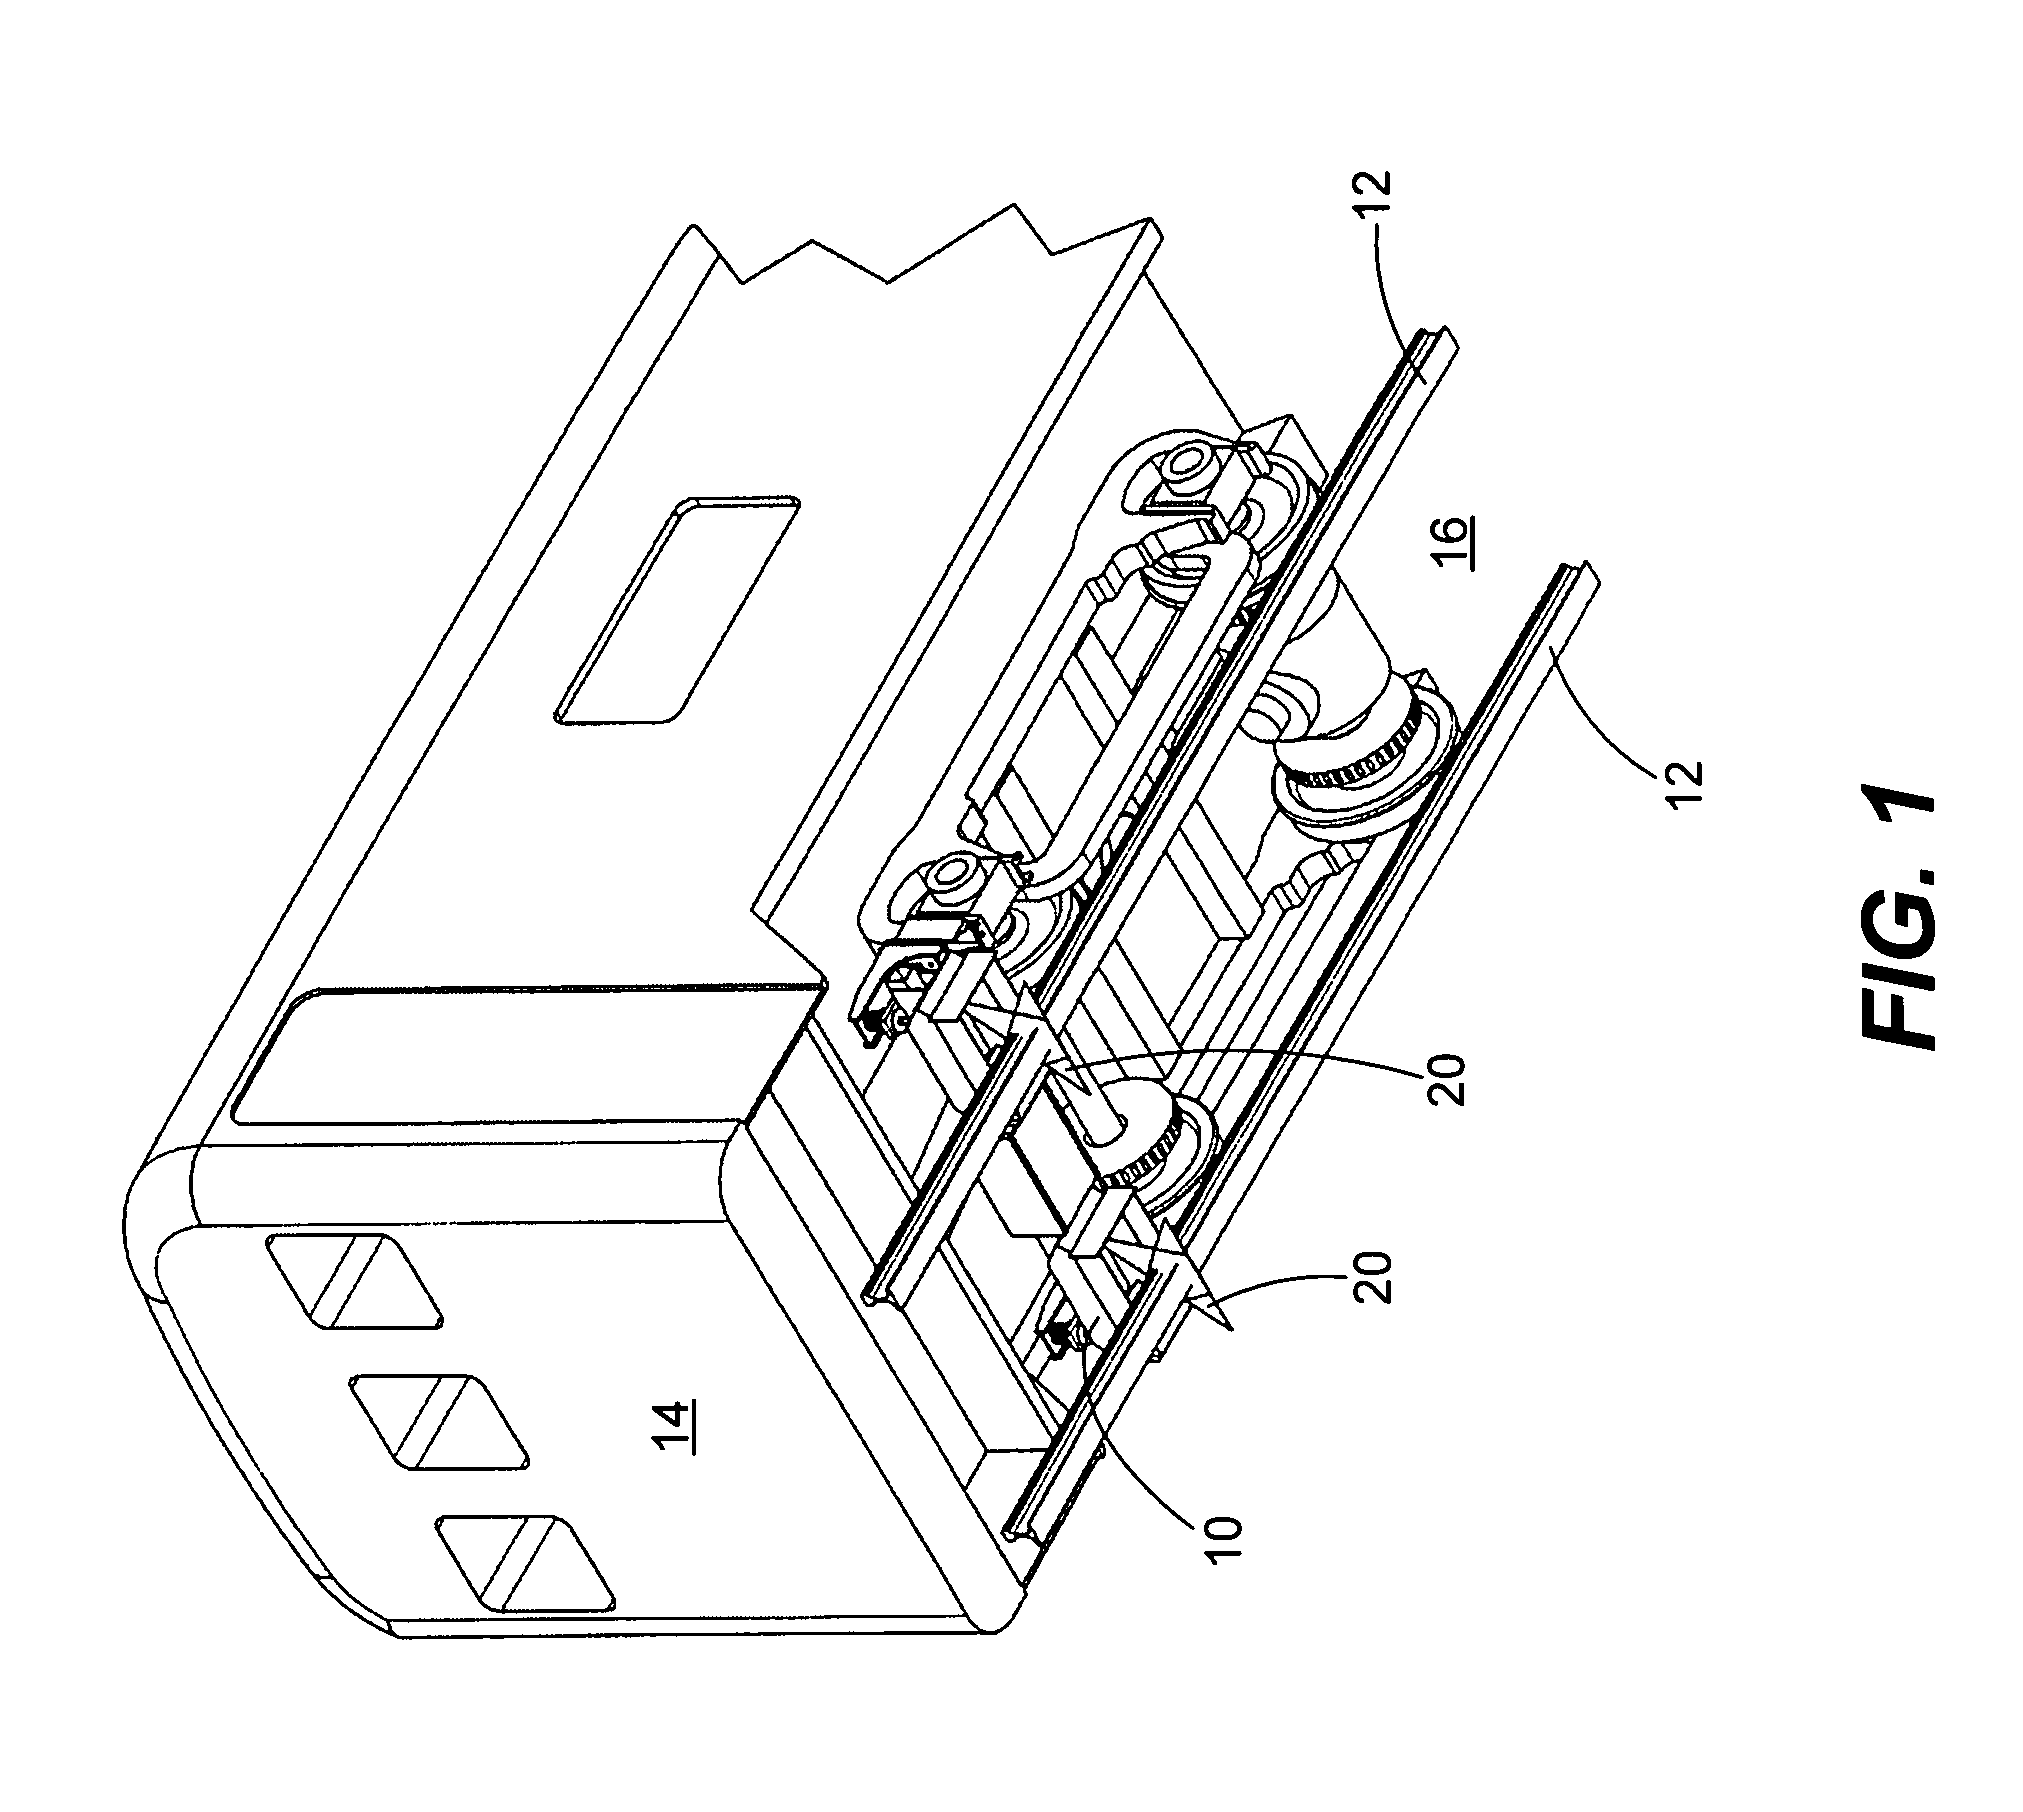 Optical path protection device and method for a railroad track inspection system